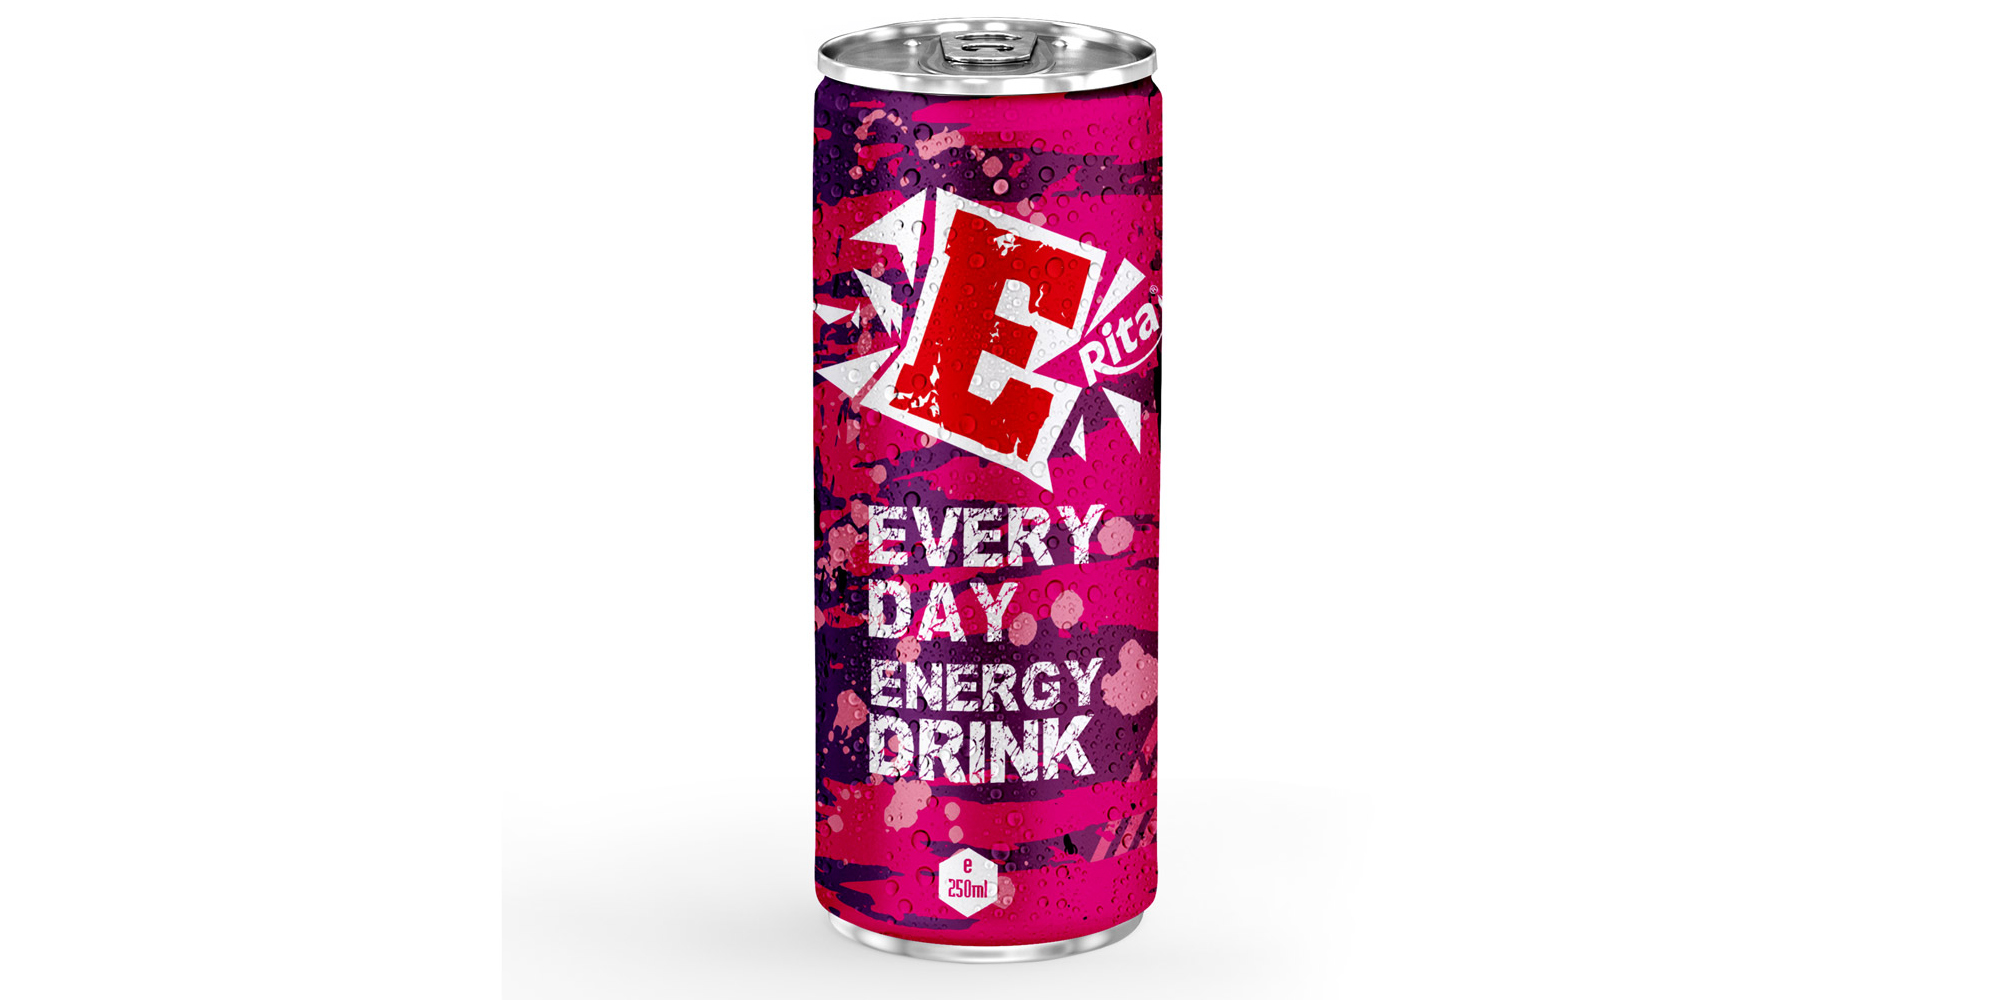 Energy drink 250ml aluminum canned  3